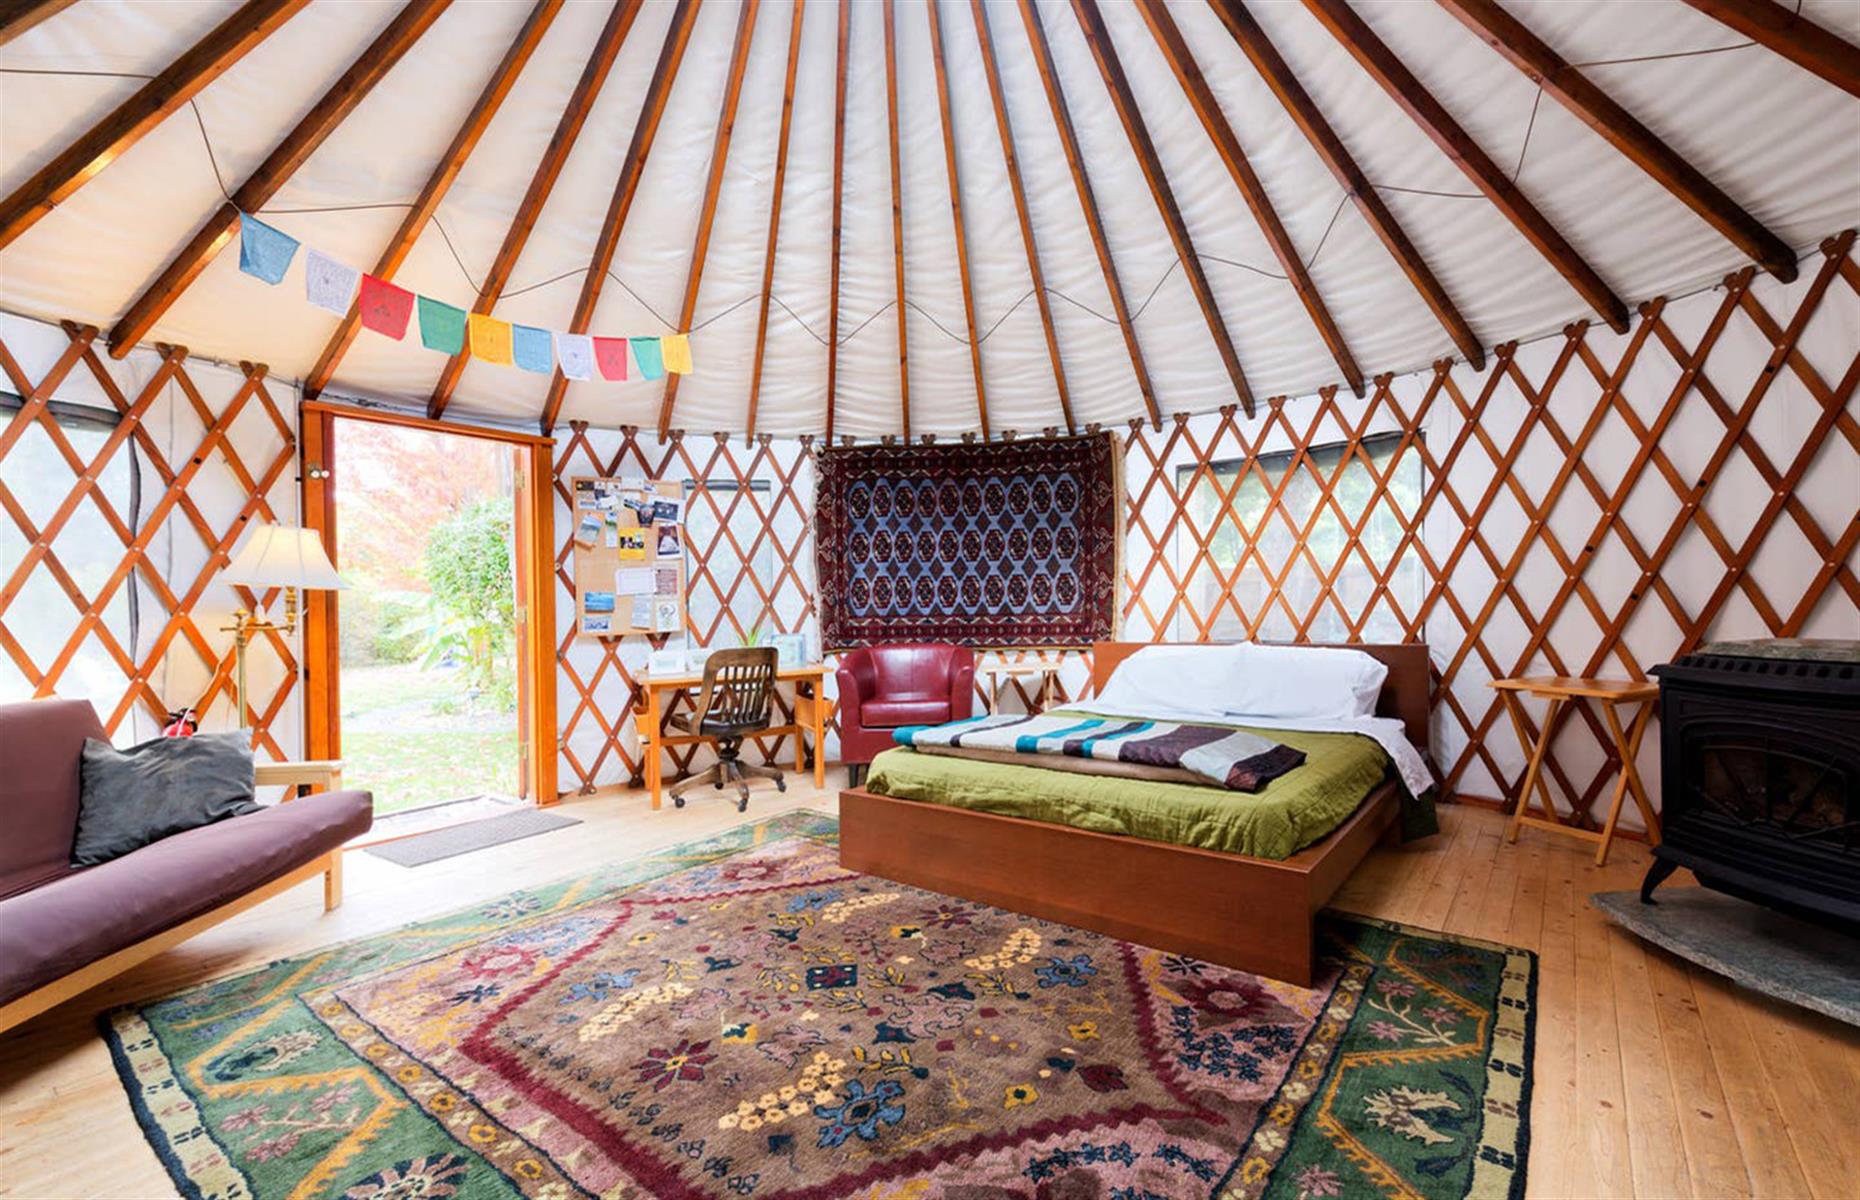 <p>For something a little bit different, book <a href="https://www.airbnb.co.uk/rooms/14837261">this stunning yurt</a> for just $65 a night – located in Boise, it's the perfect stop on a classic American road trip. Complete with plush furnishings, it also boasts an indoor fireplace, an outdoor fireplace and a pergola with a table, plus all the little essentials you might need during your stay. </p>